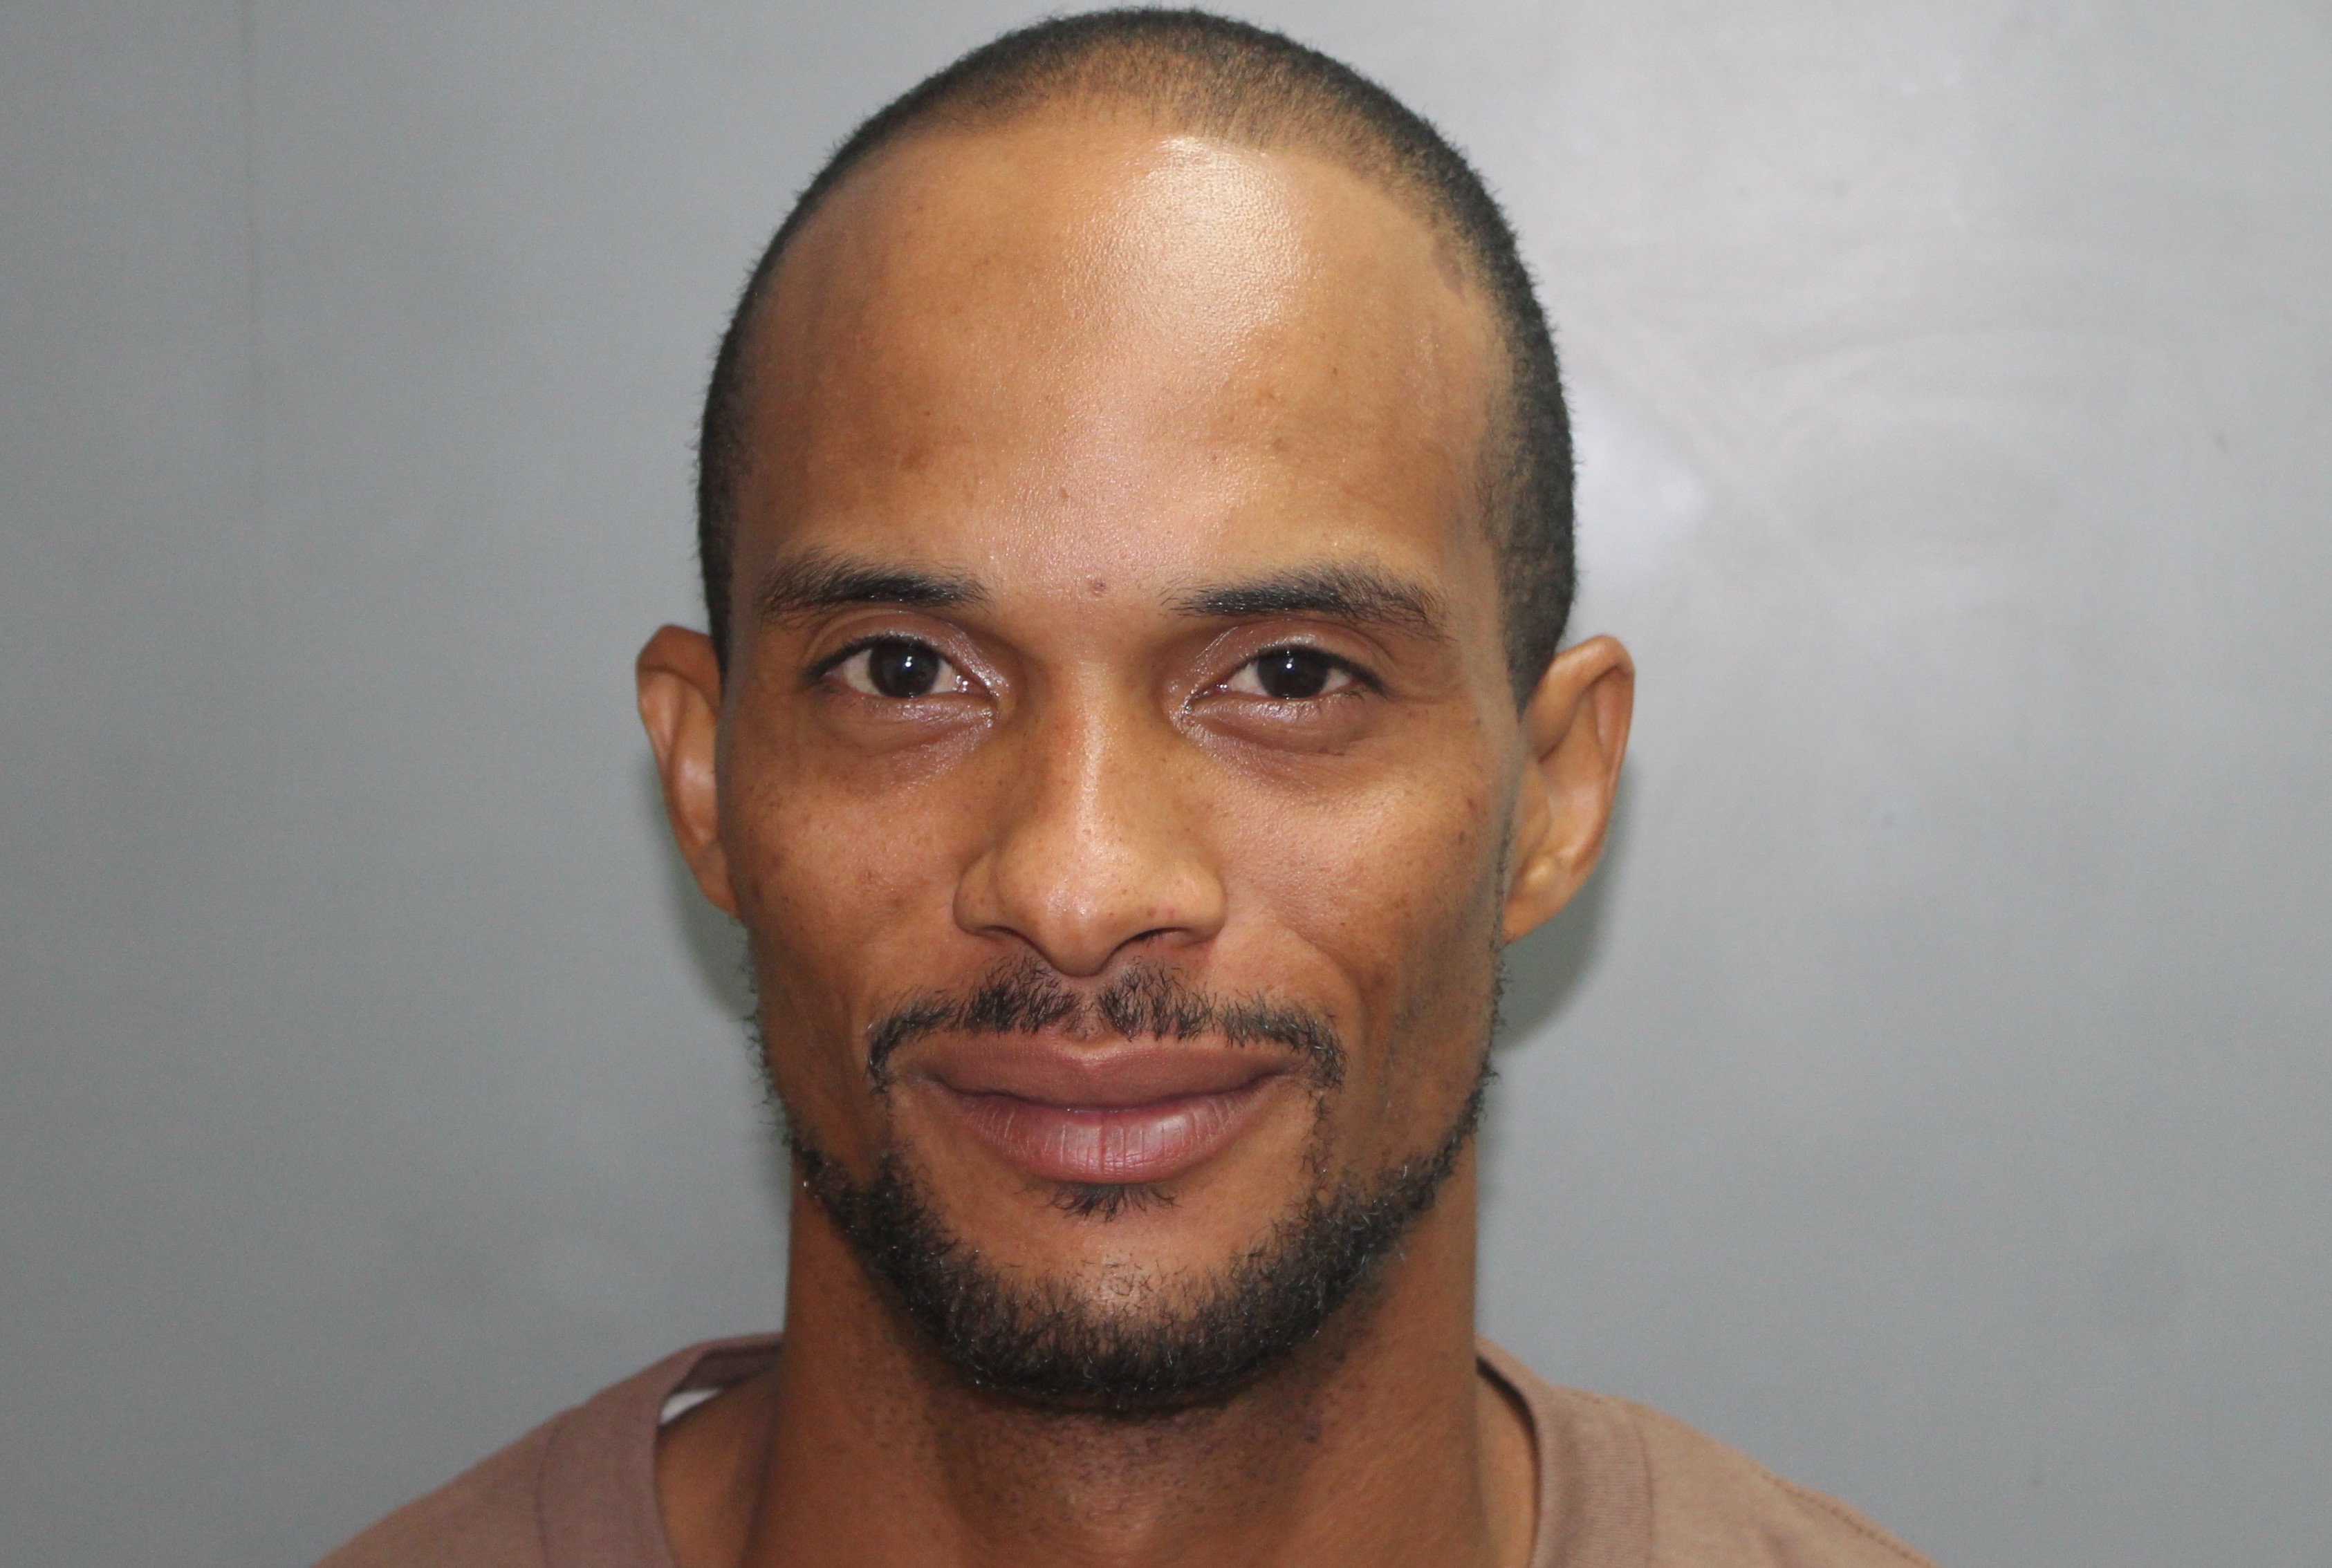 St. Croix's Jorge Borque Arrested For Allegedly Beating, Strangling Woman At Long Reef Condos